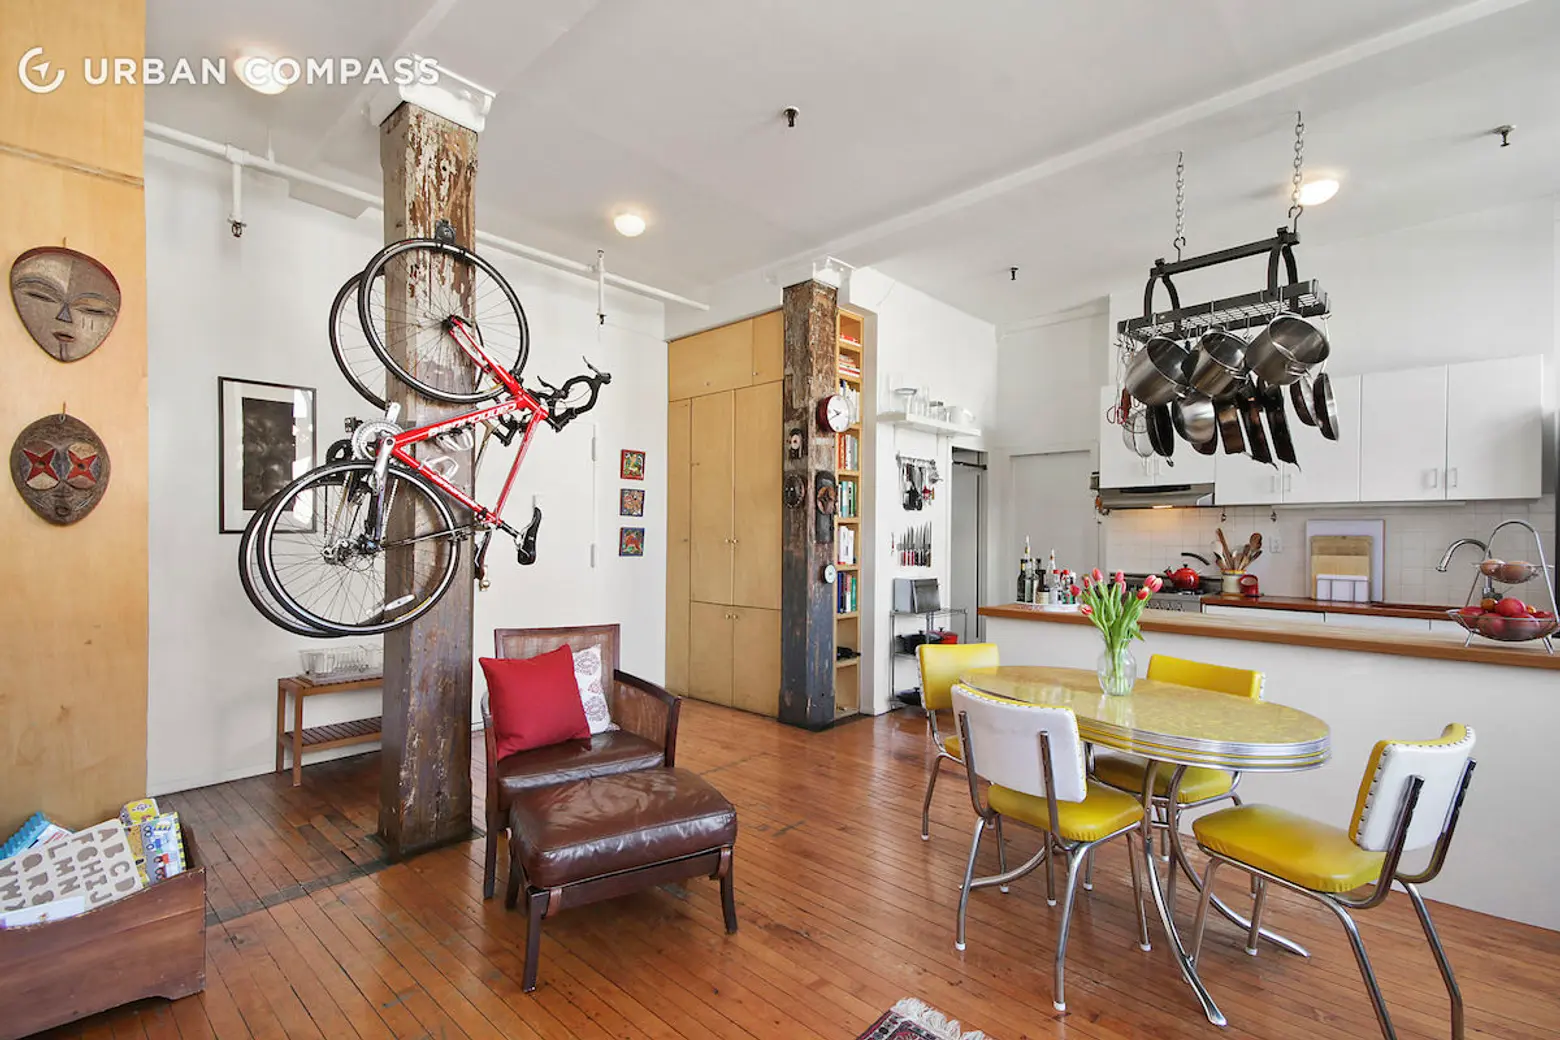 $1M Sunny Loft in Former Chocolate Factory Is a Golden Ticket